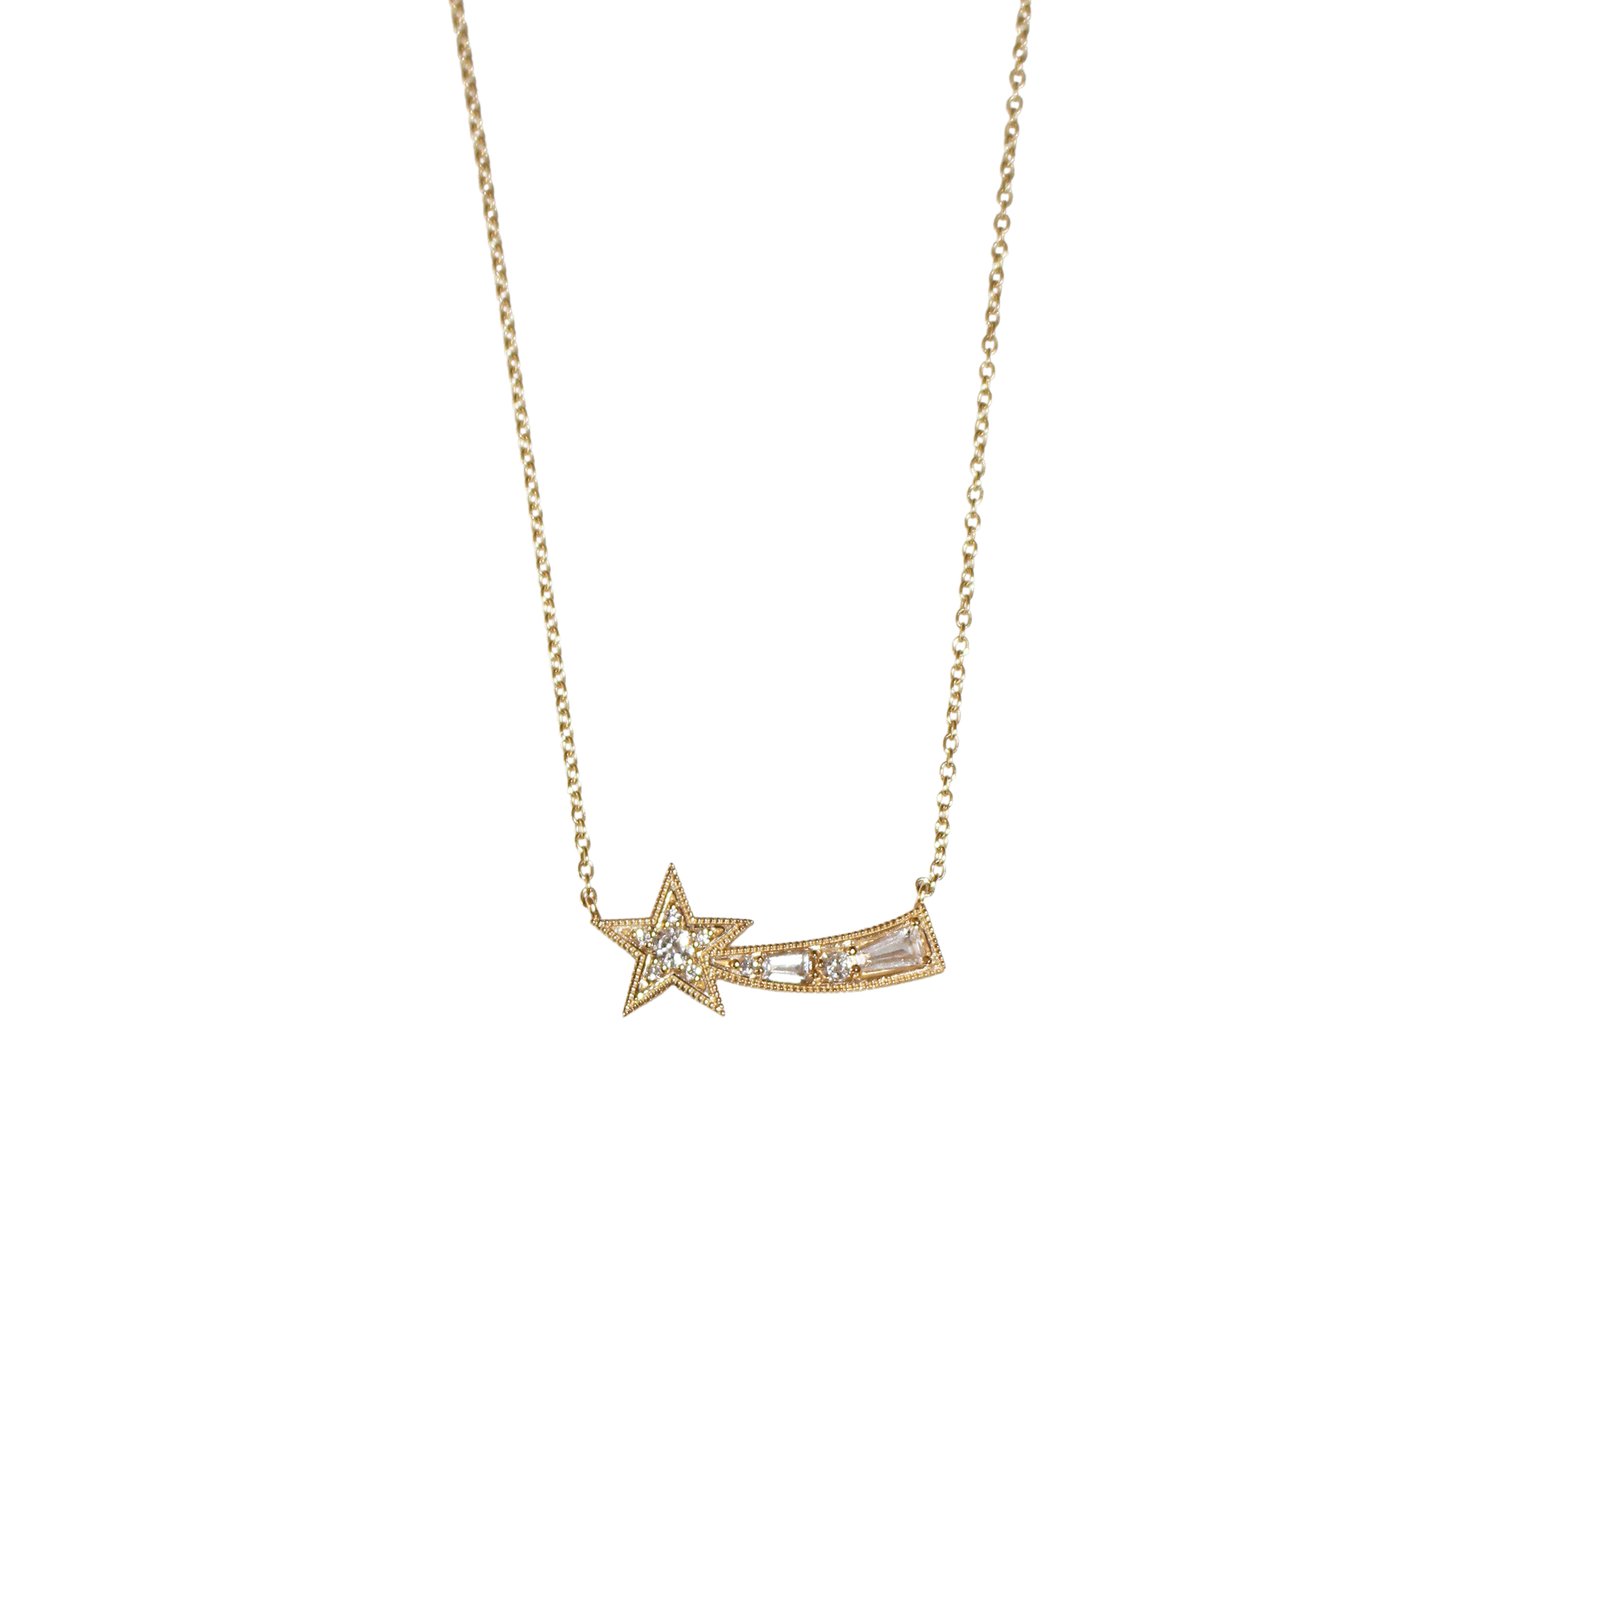 Shooting Stars Sterling Silver Necklace - NEW ARRIVAL | Starburst necklace,  Fashion necklace, Star necklace